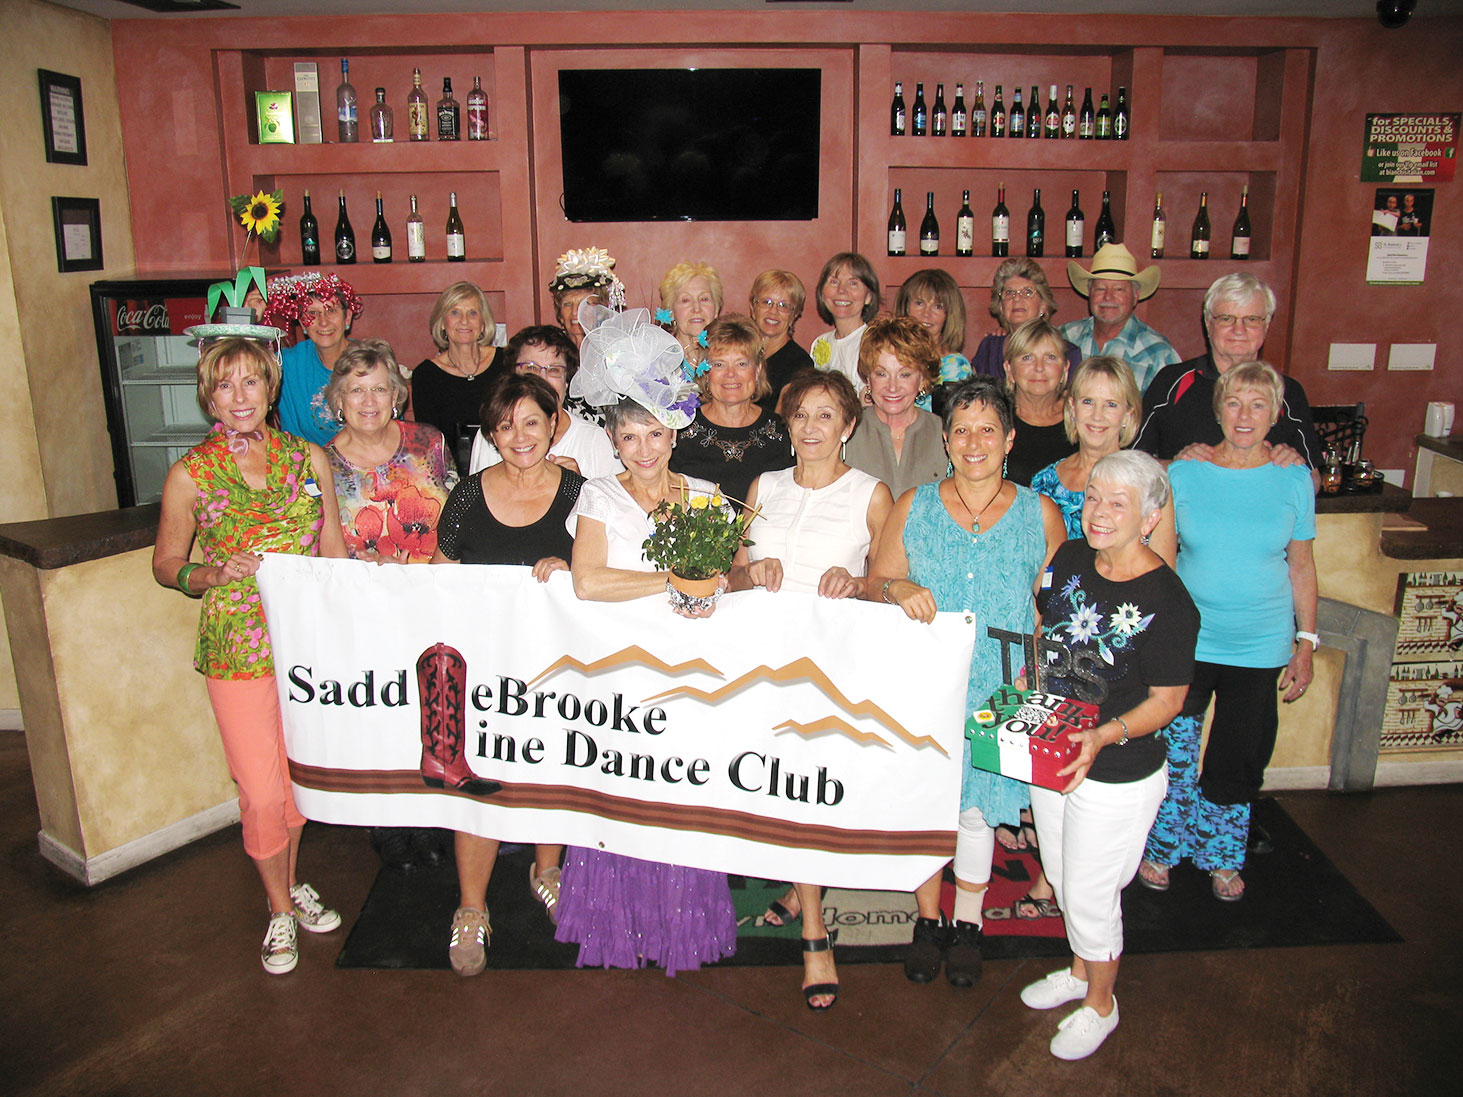 Charli Jackson (center), the decorated hat winner, wearing her creation and holding her prize of a potted yellow rose and trellis amongst the other members of the SaddleBrooke Line Dance Club.